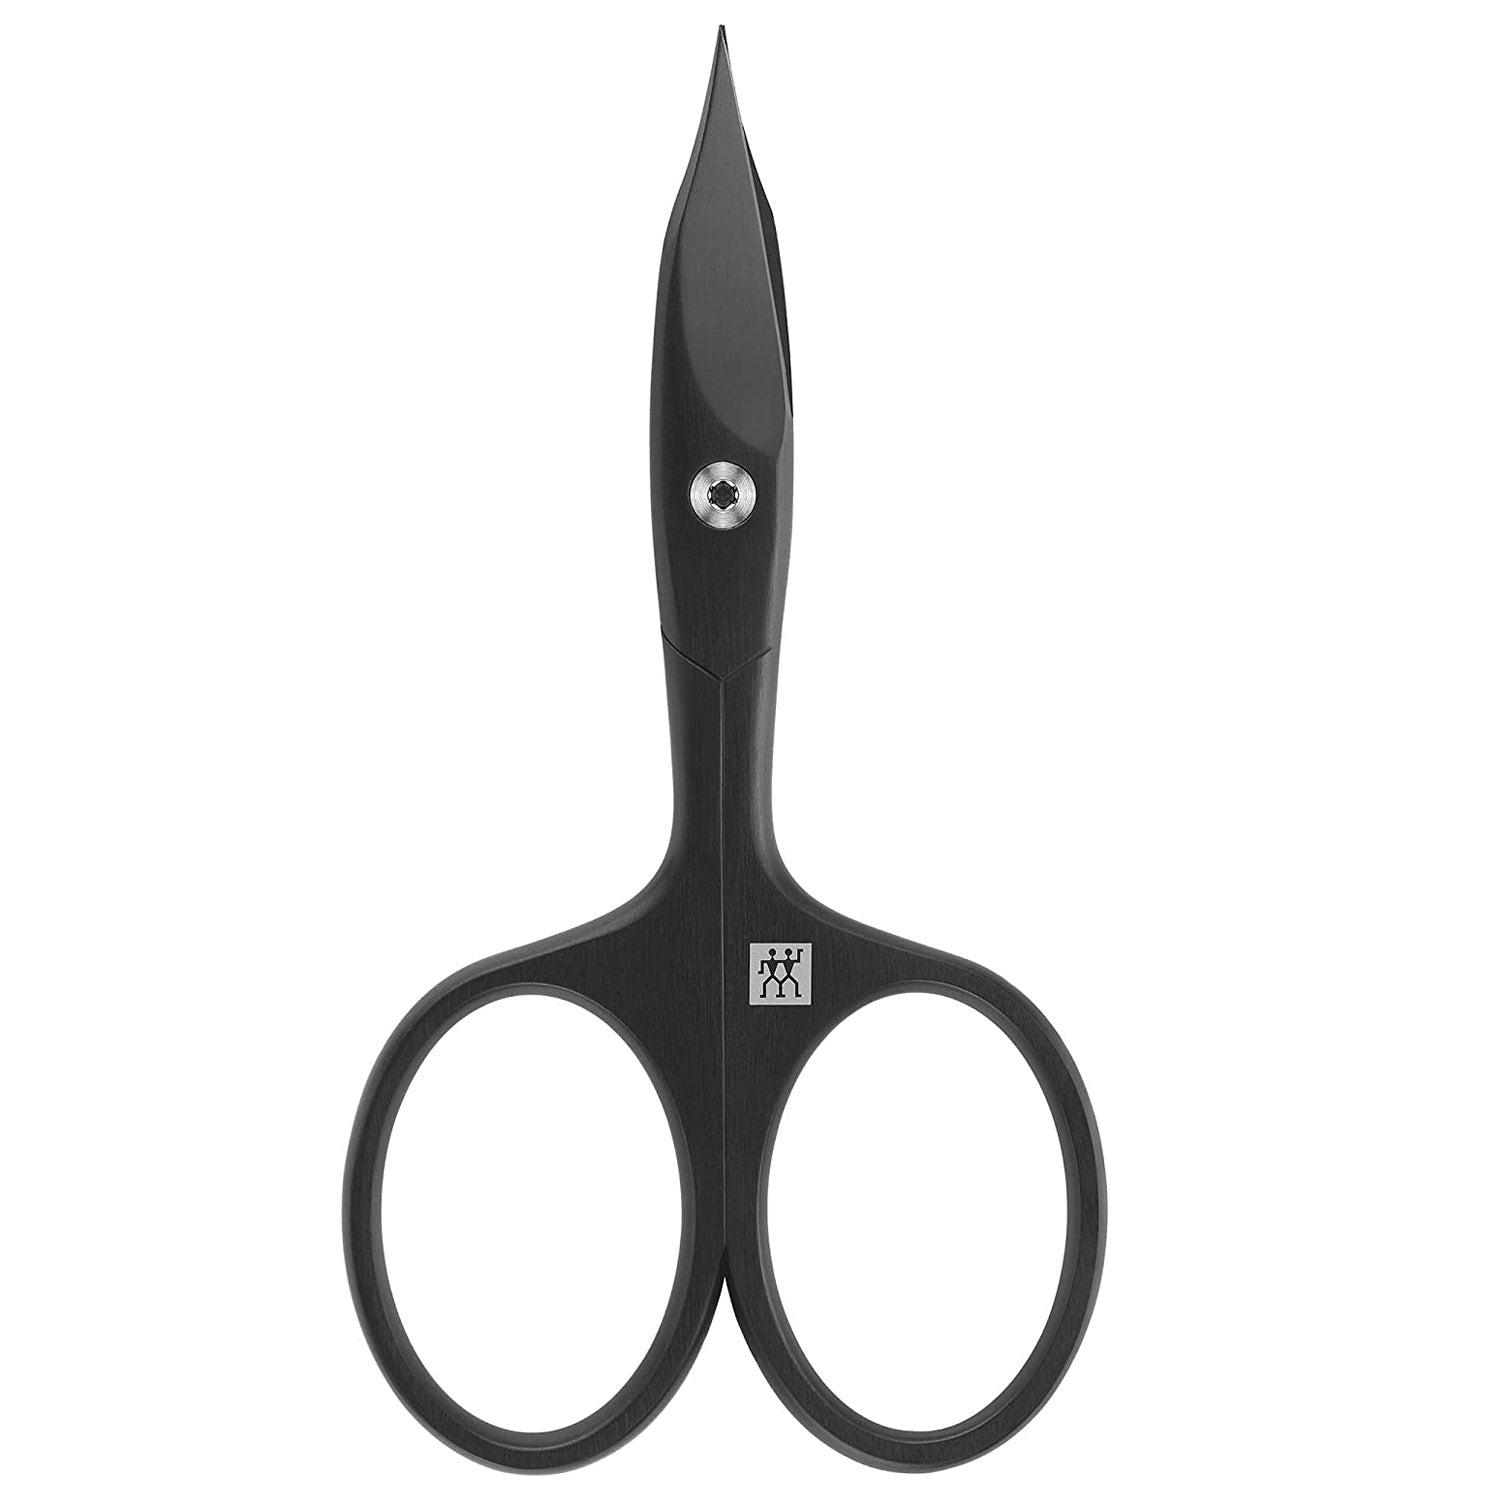 Cuticle scissors in matt stainless steel from Zwilling